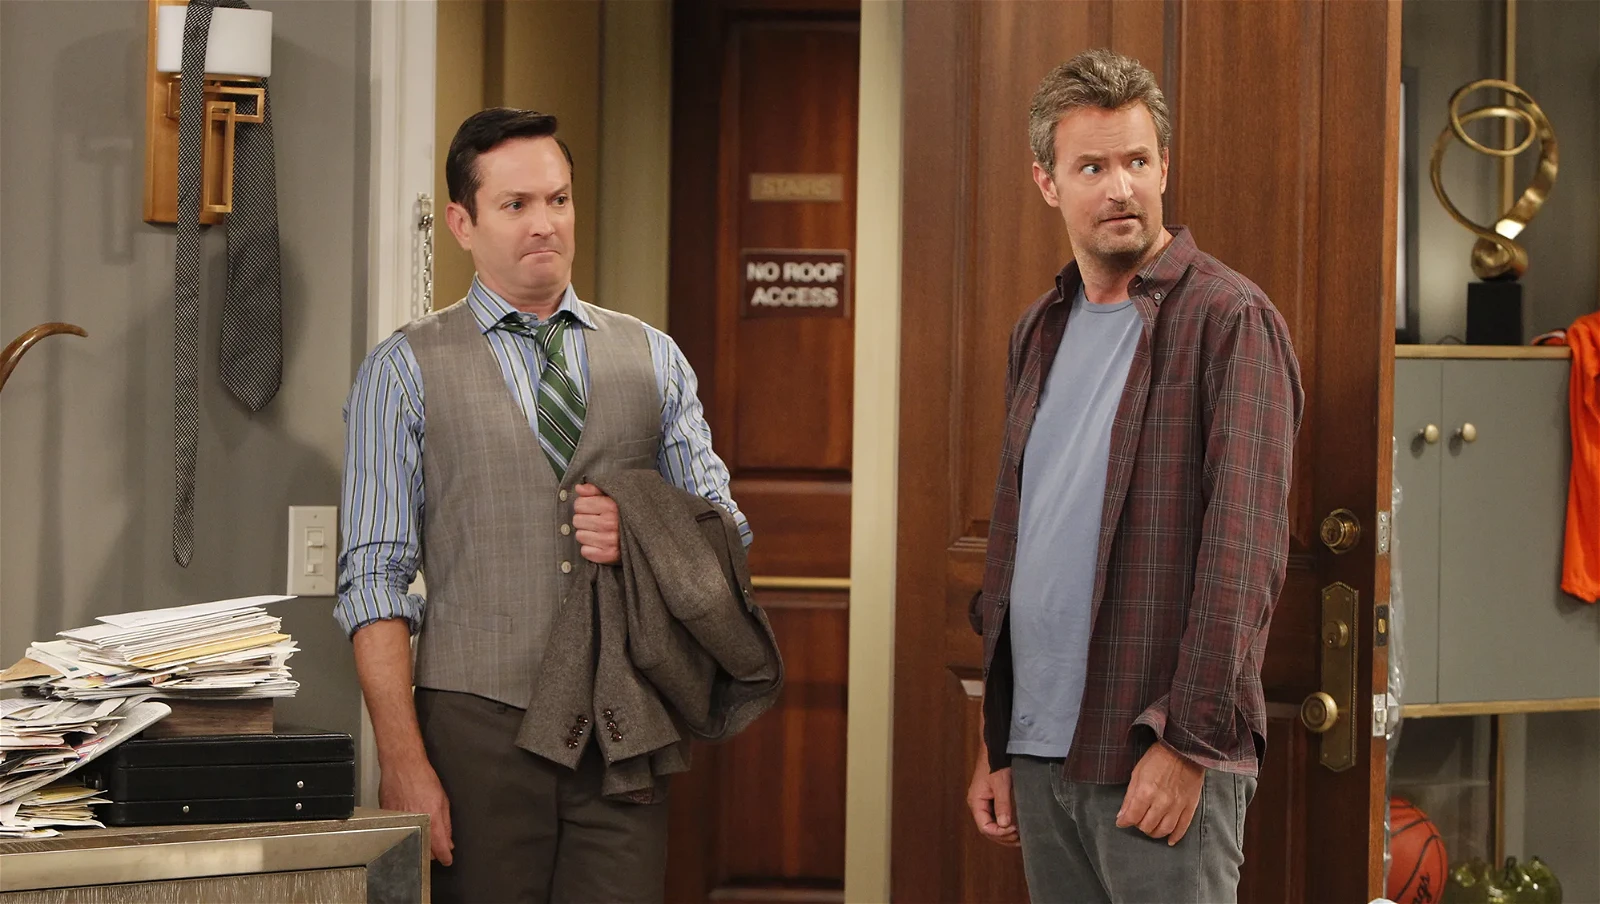 Matthew Perry with Thomas Lennon in The Odd Couple